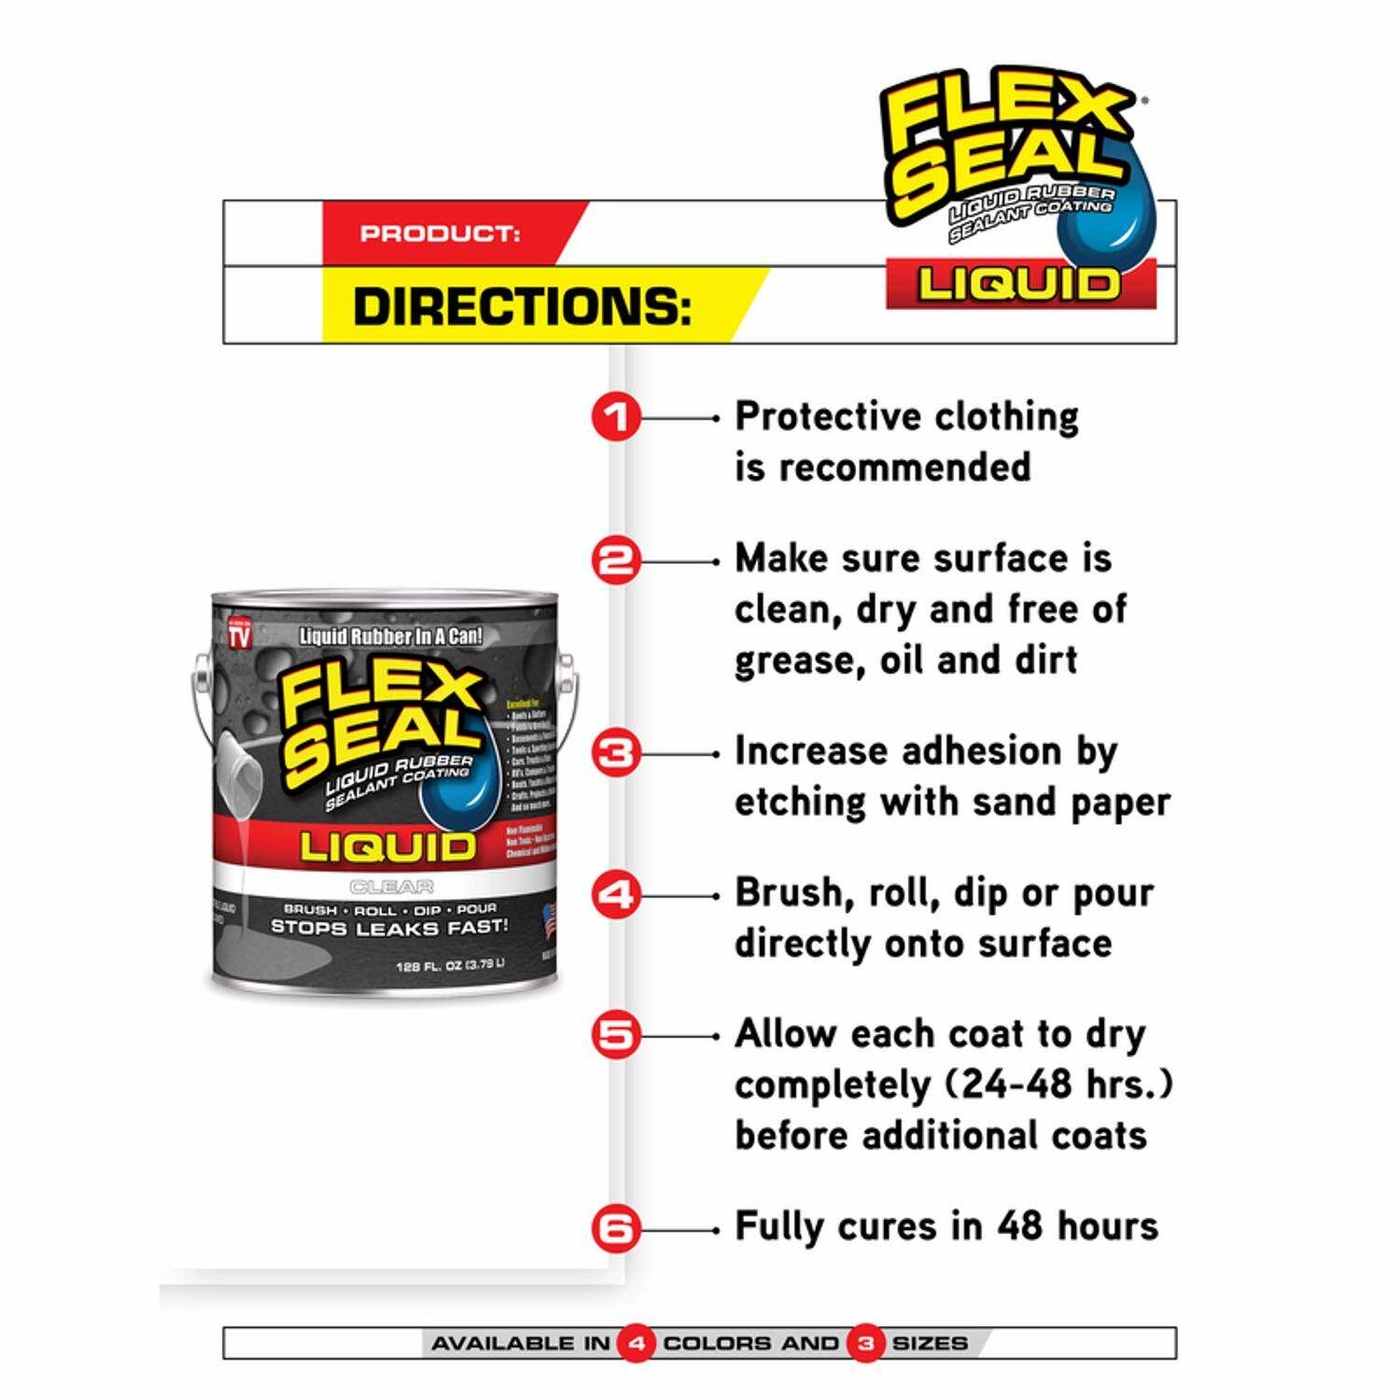 Flex Seal Family of Products